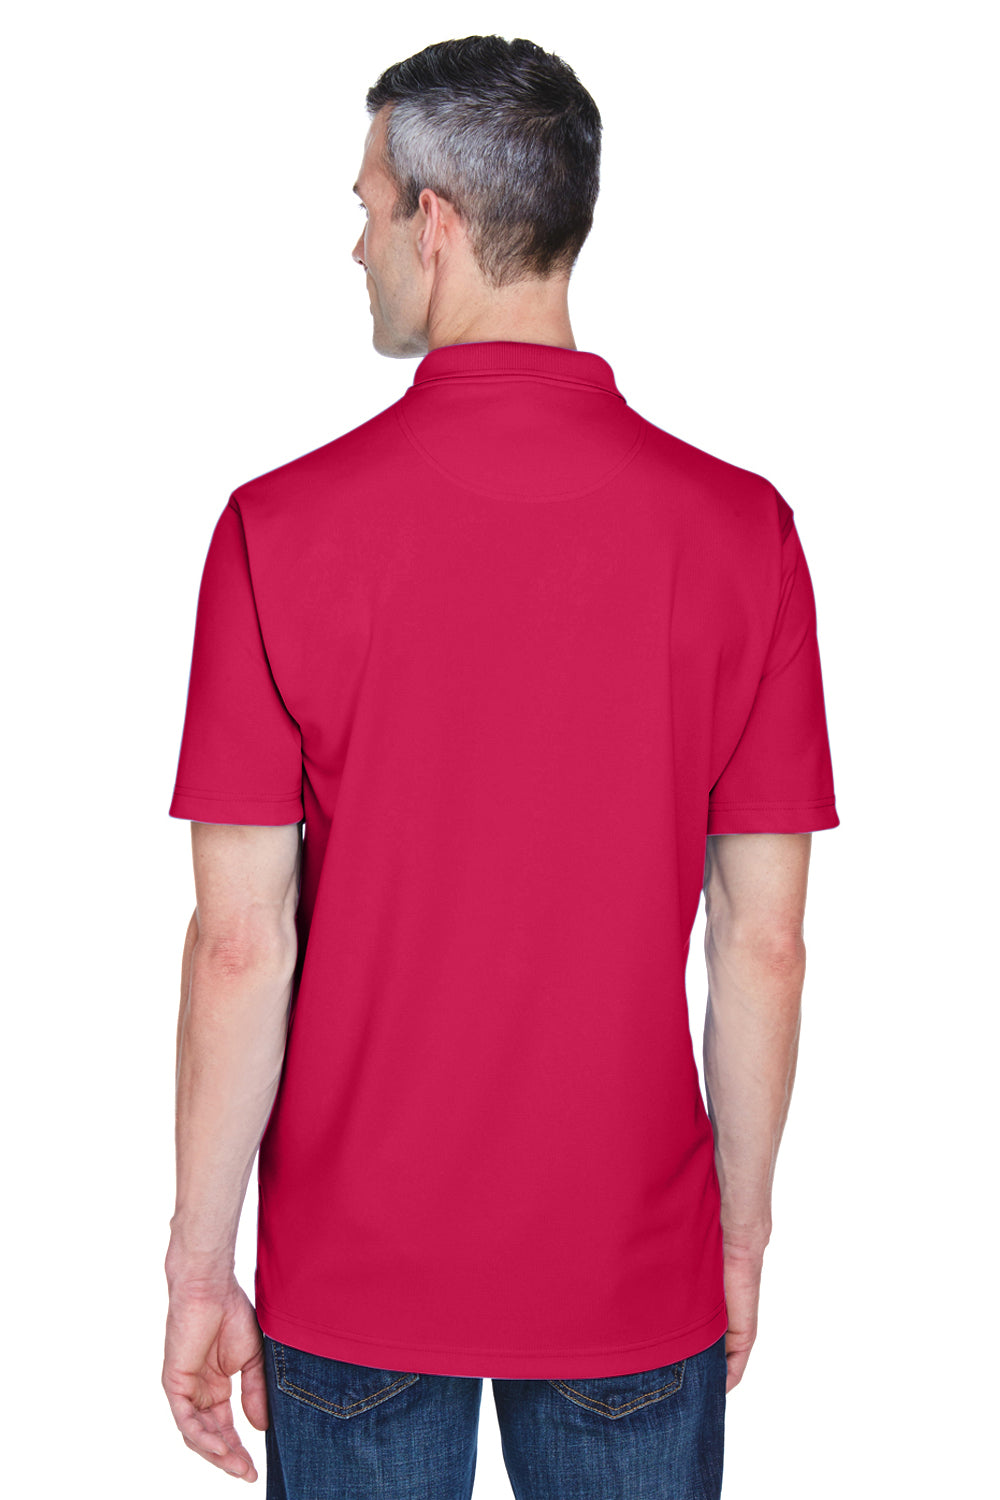 UltraClub 8445 Mens Cool & Dry Performance Moisture Wicking Short Sleeve Polo Shirt Cardinal Red Back